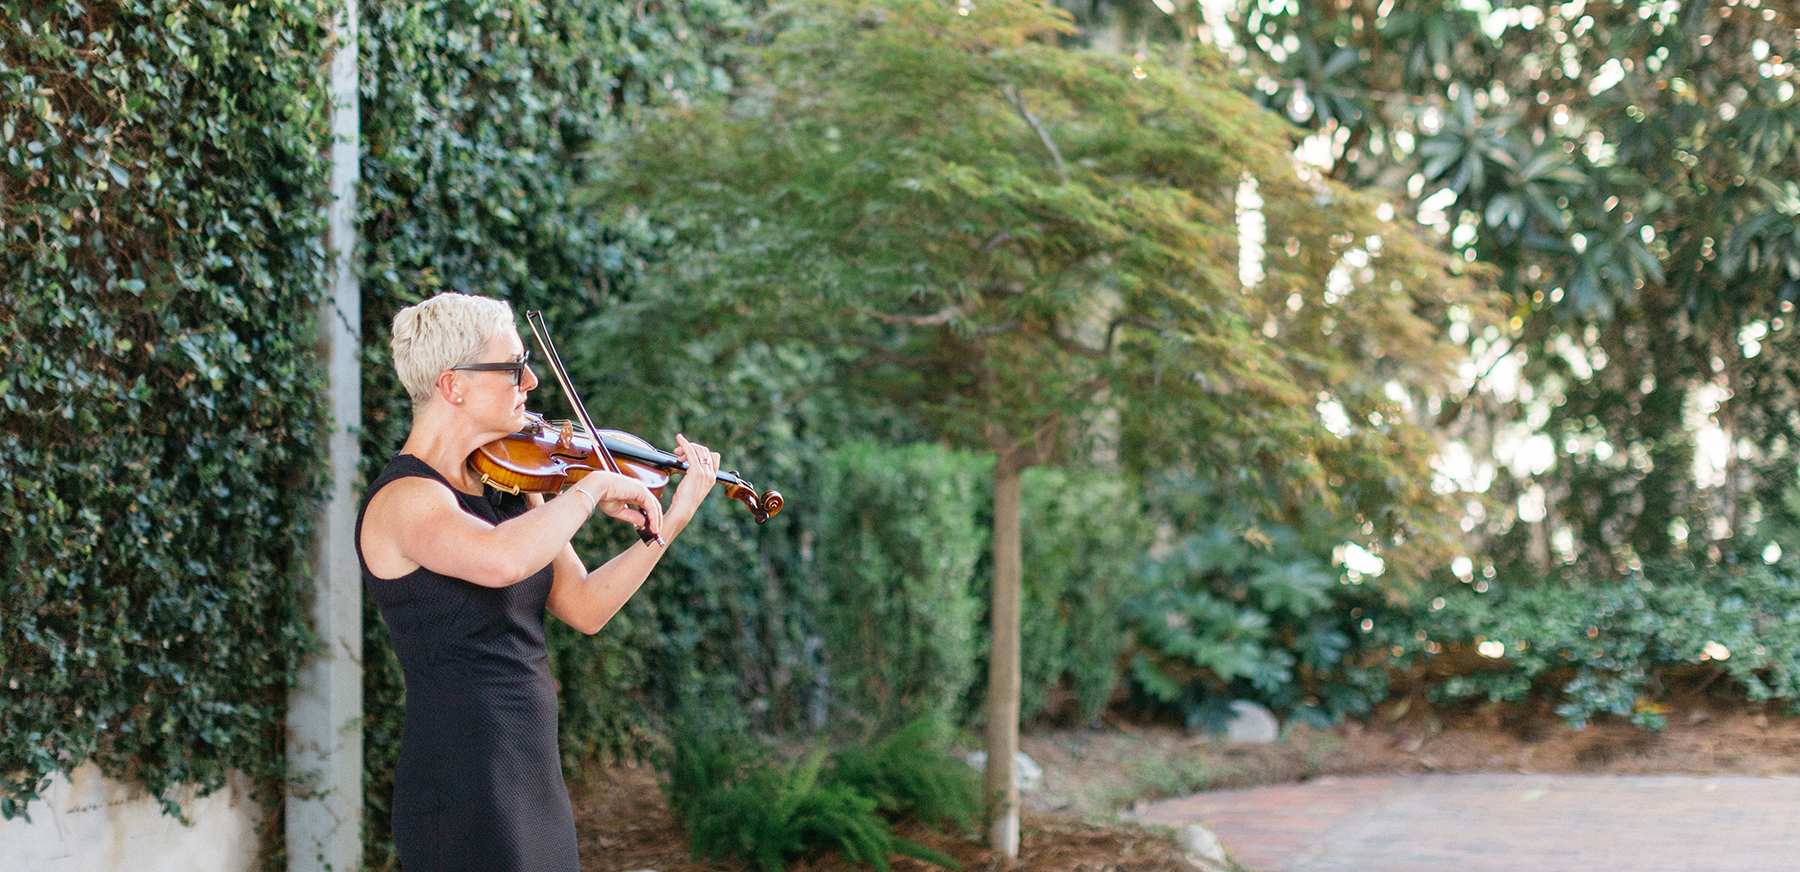 Maura playing violin at an outdoor event